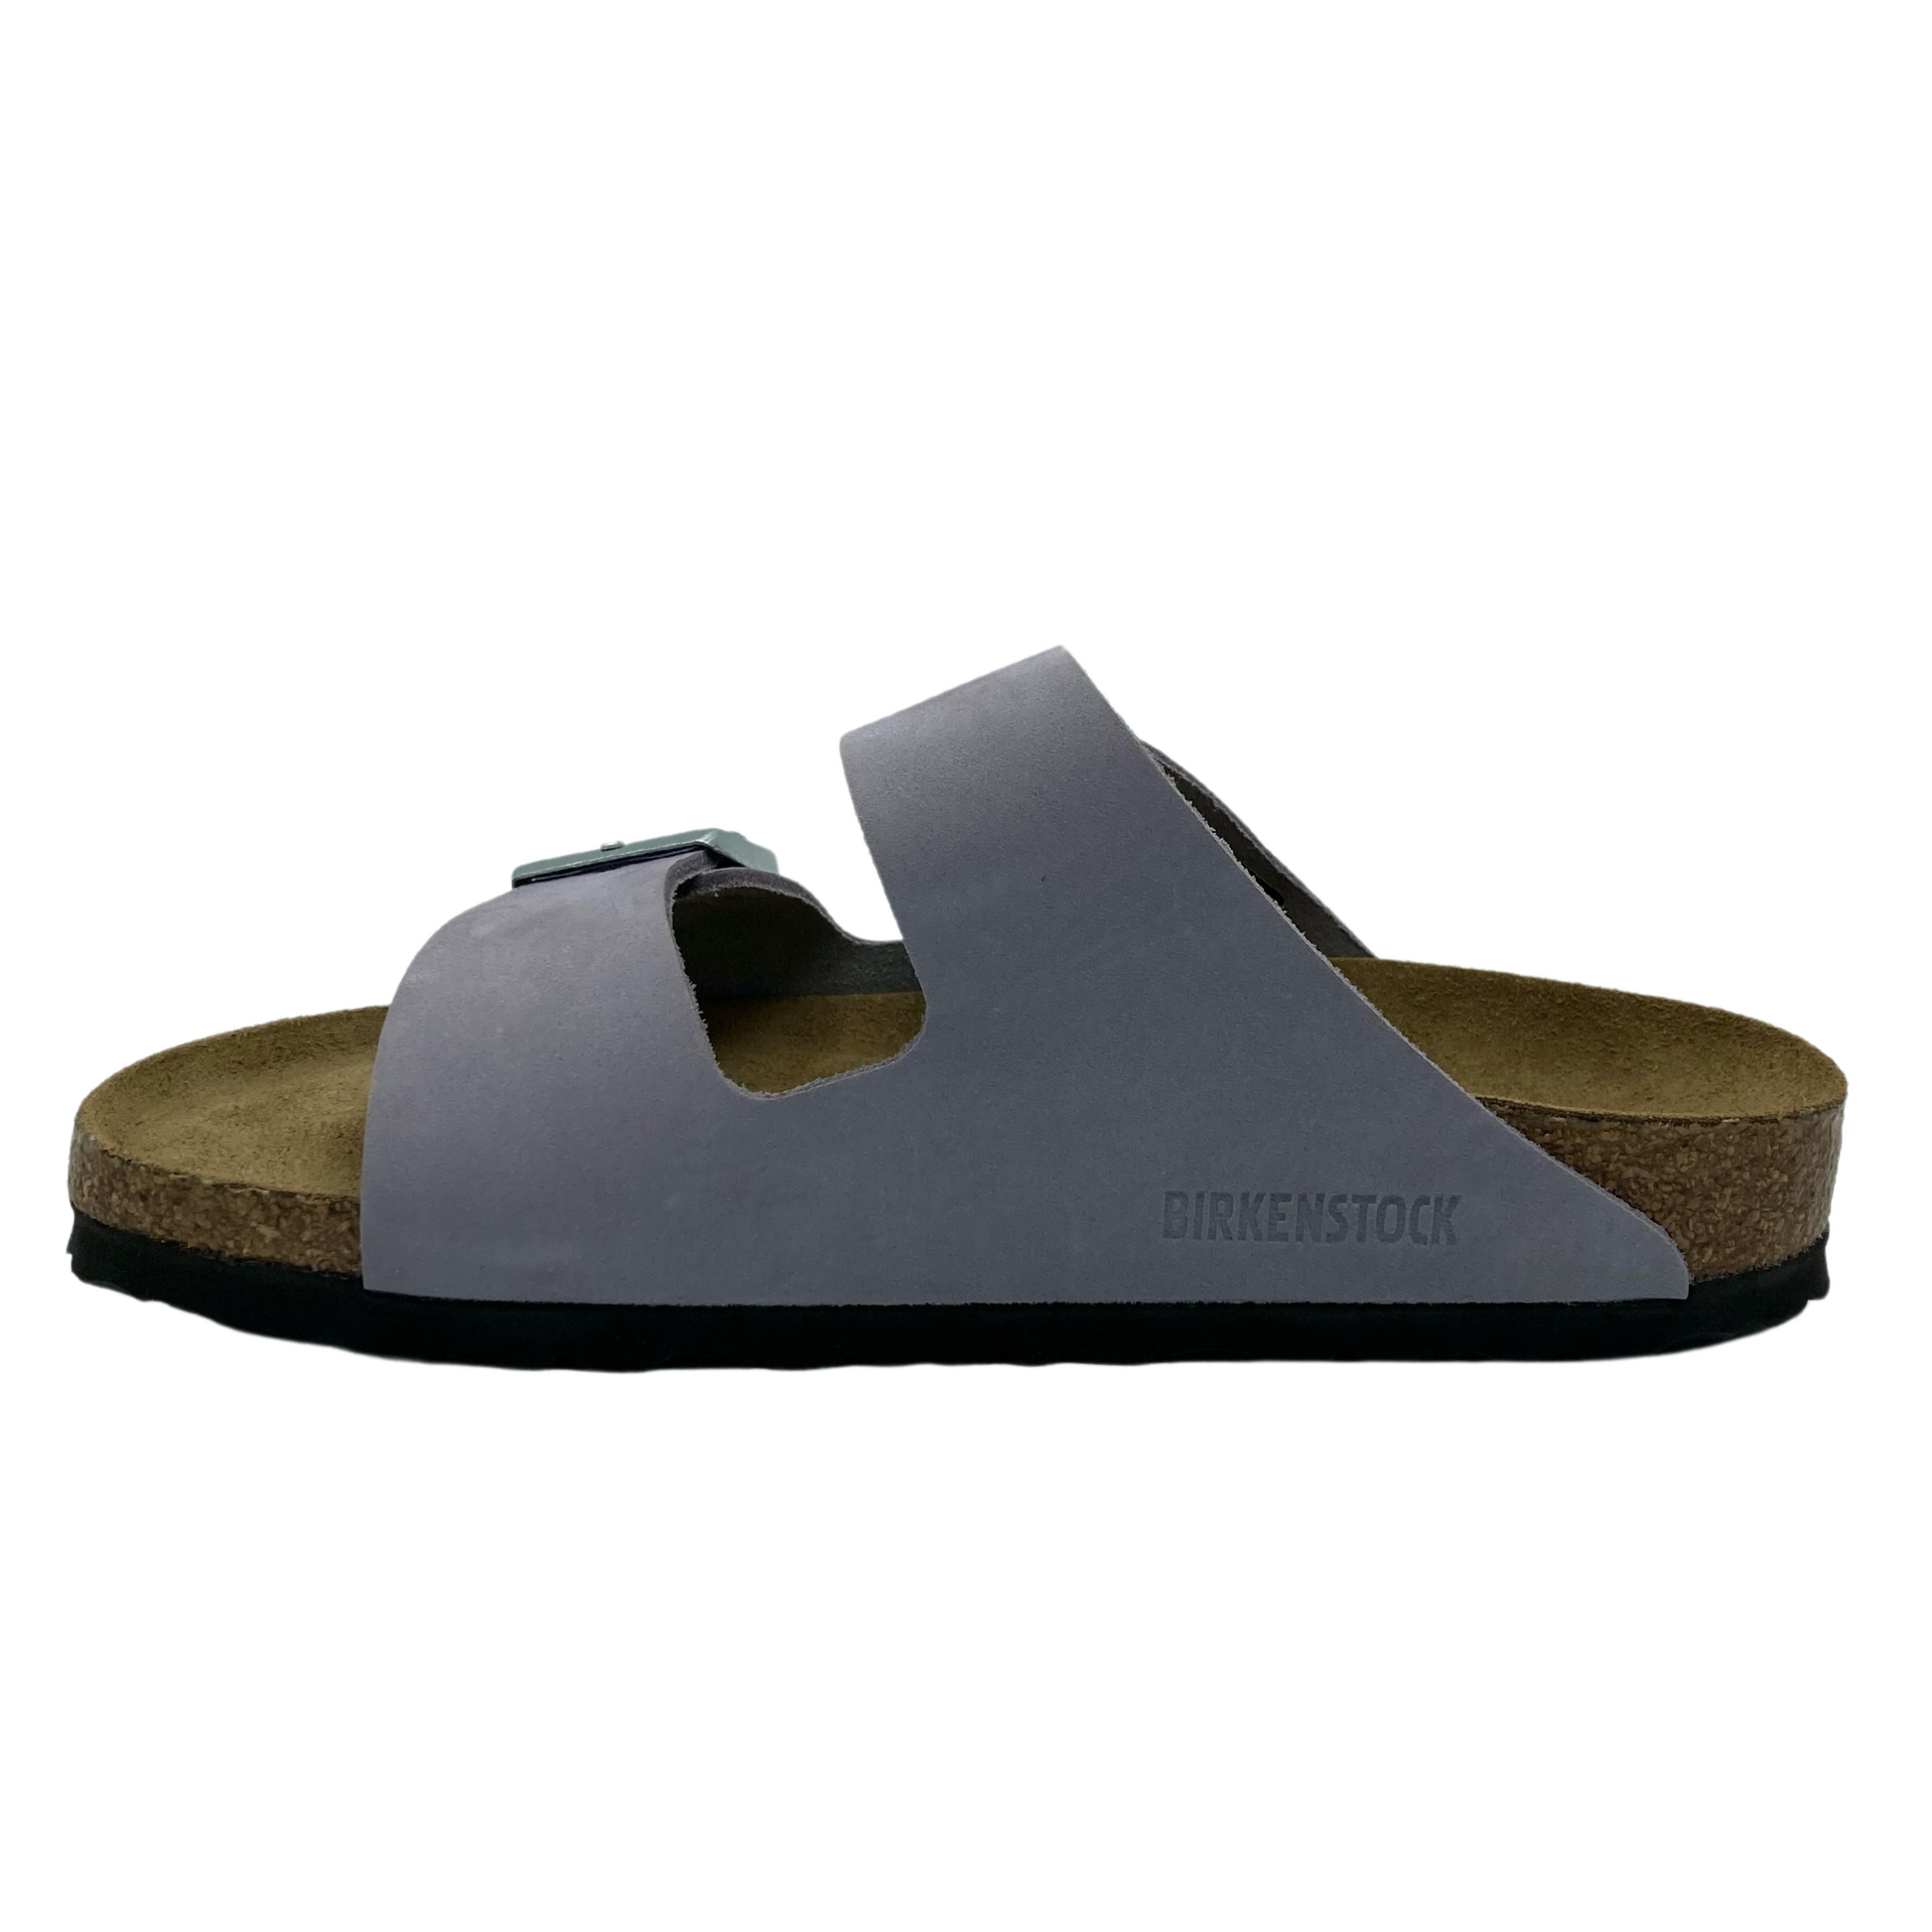 Left facing view of leather suede sandal with light purple upper and two toned brown footbed